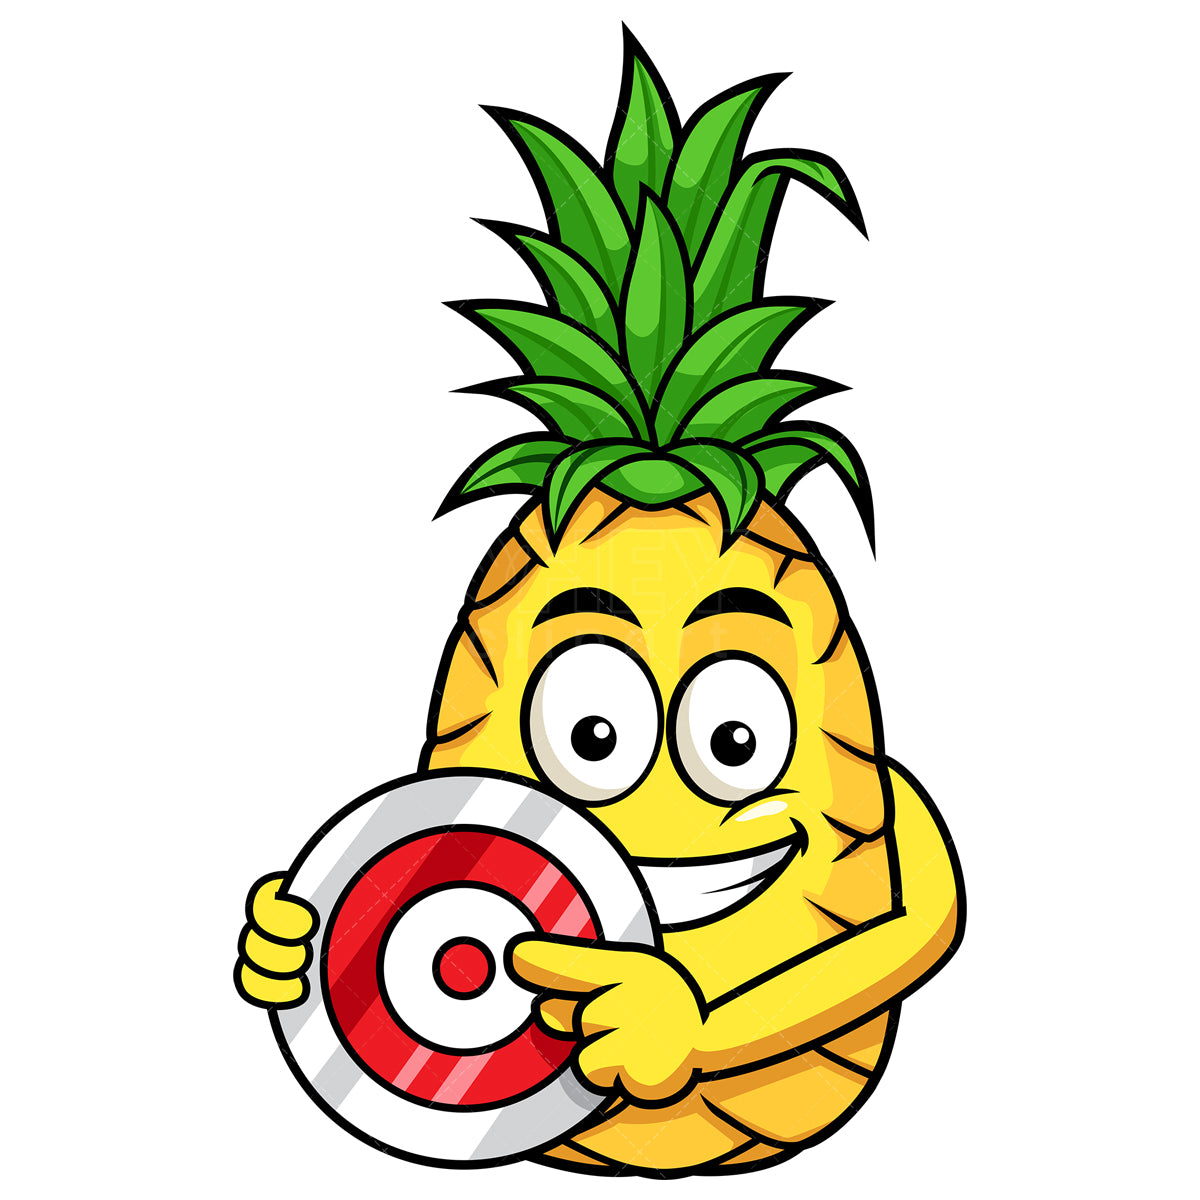 Royalty-free stock vector illustration of  a pineapple pointing to red target.